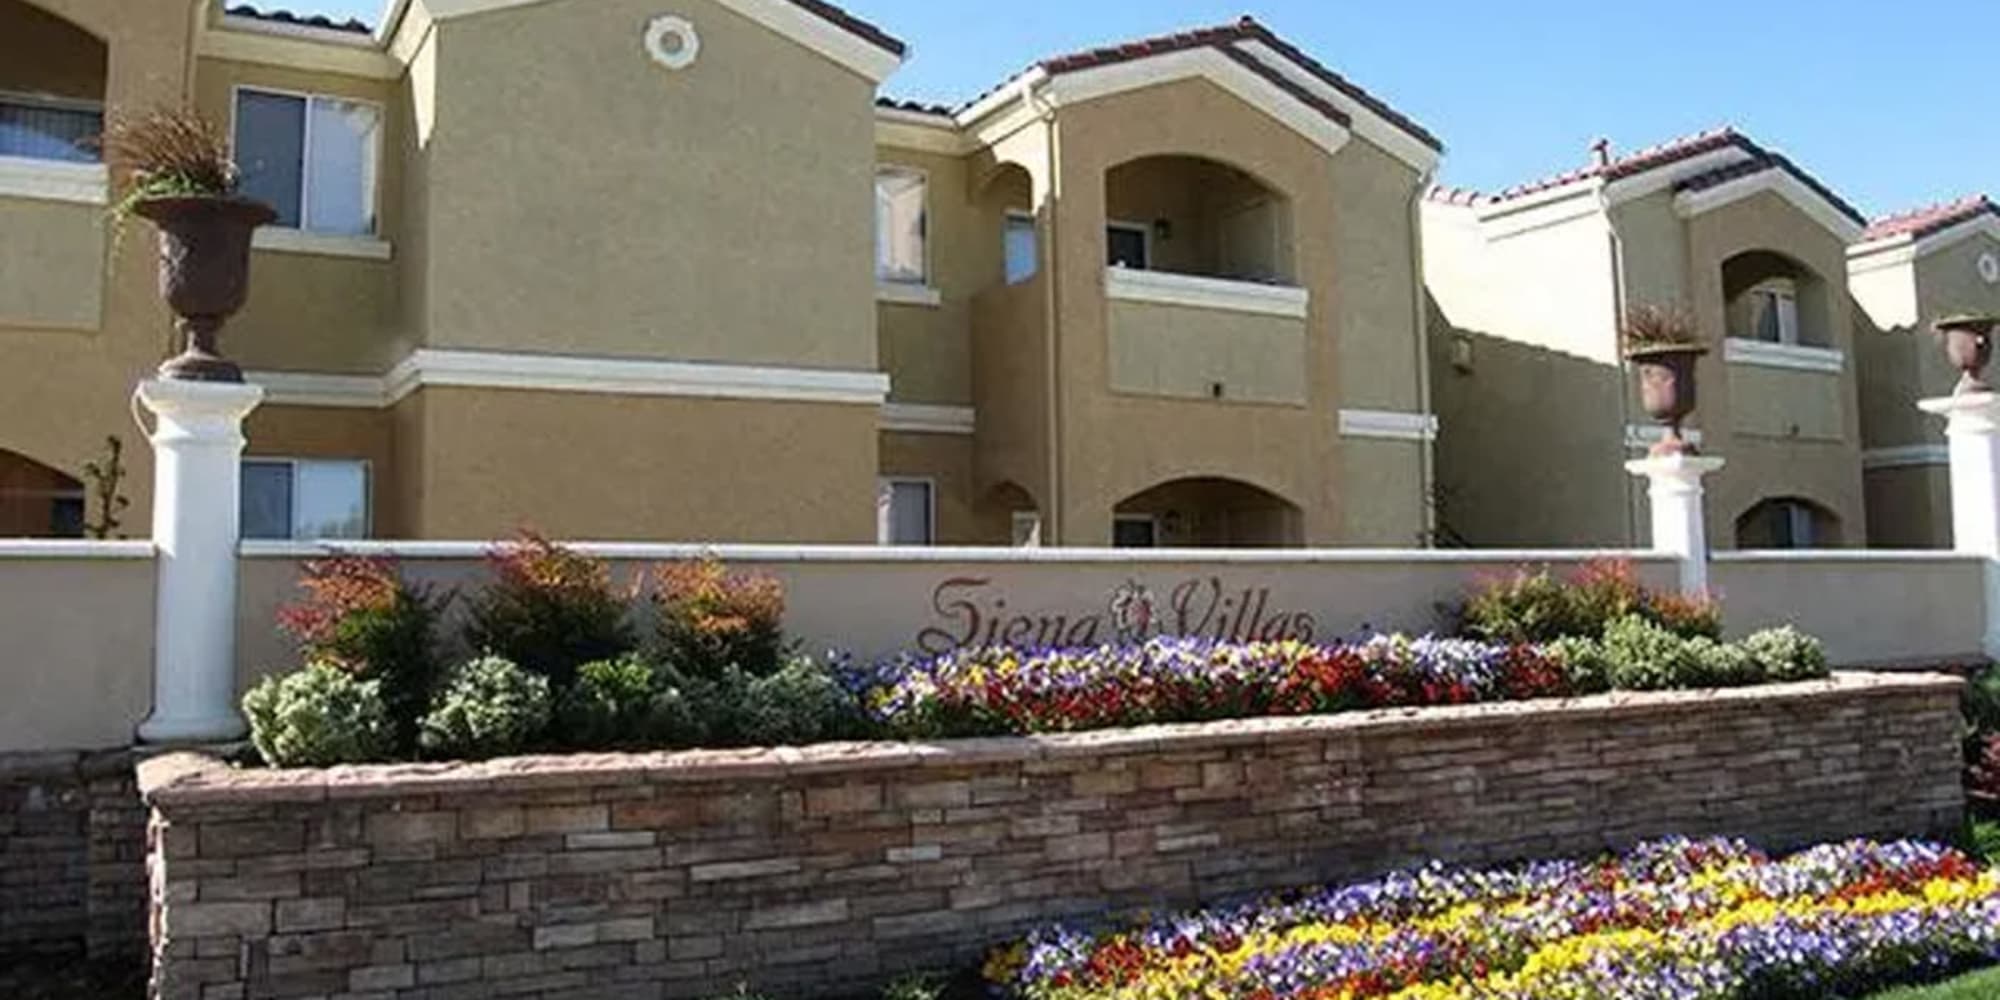 Exterior view with welcome sign at Siena Villas Apartments in Elk Grove, California